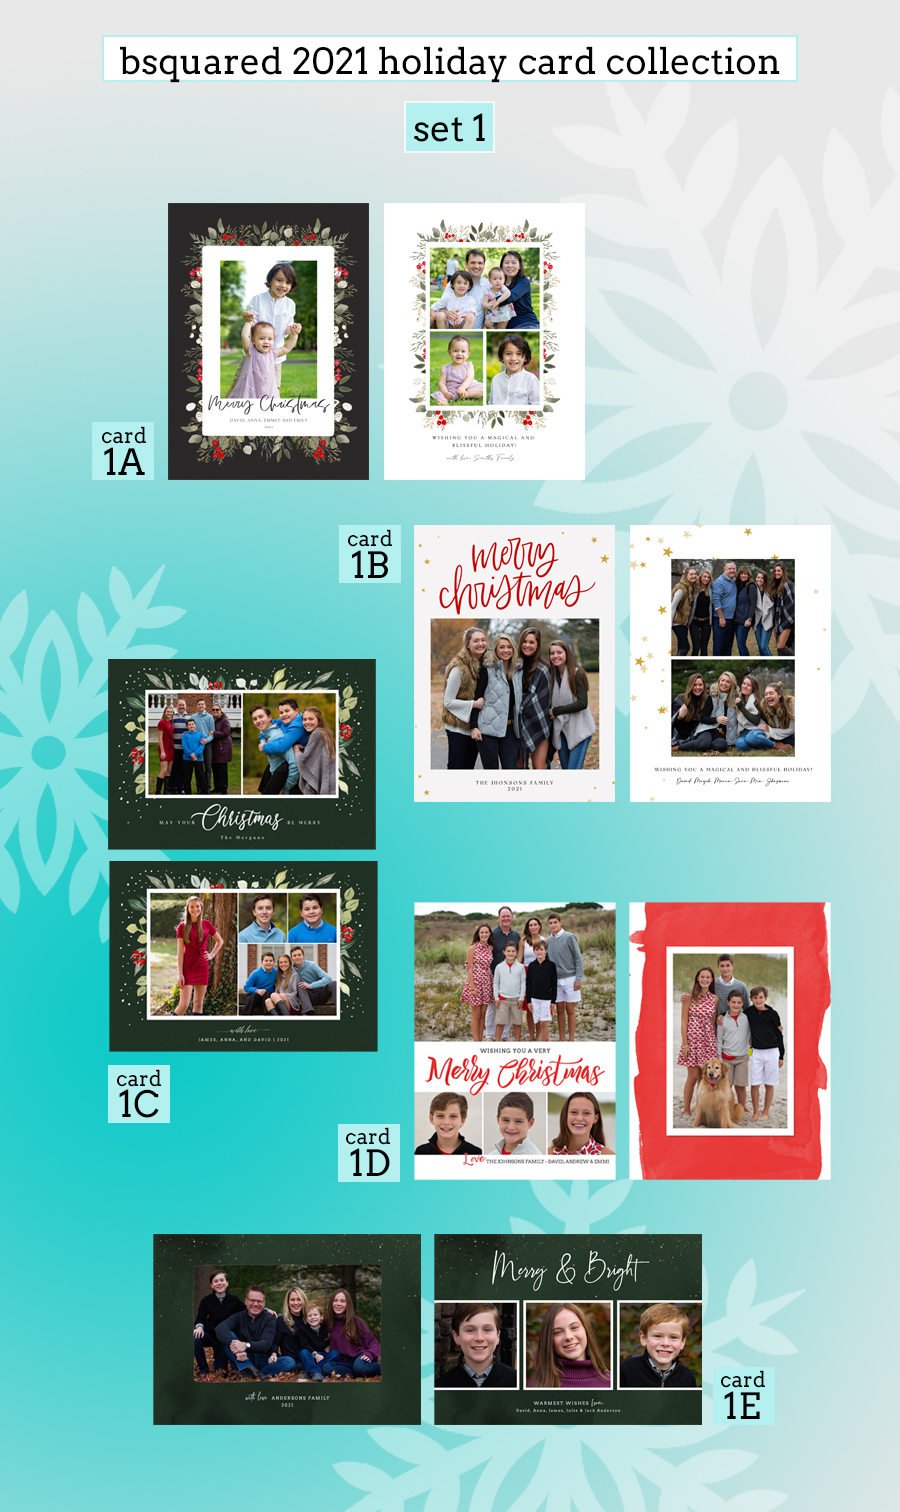 bsquared 2021 holiday cards 1